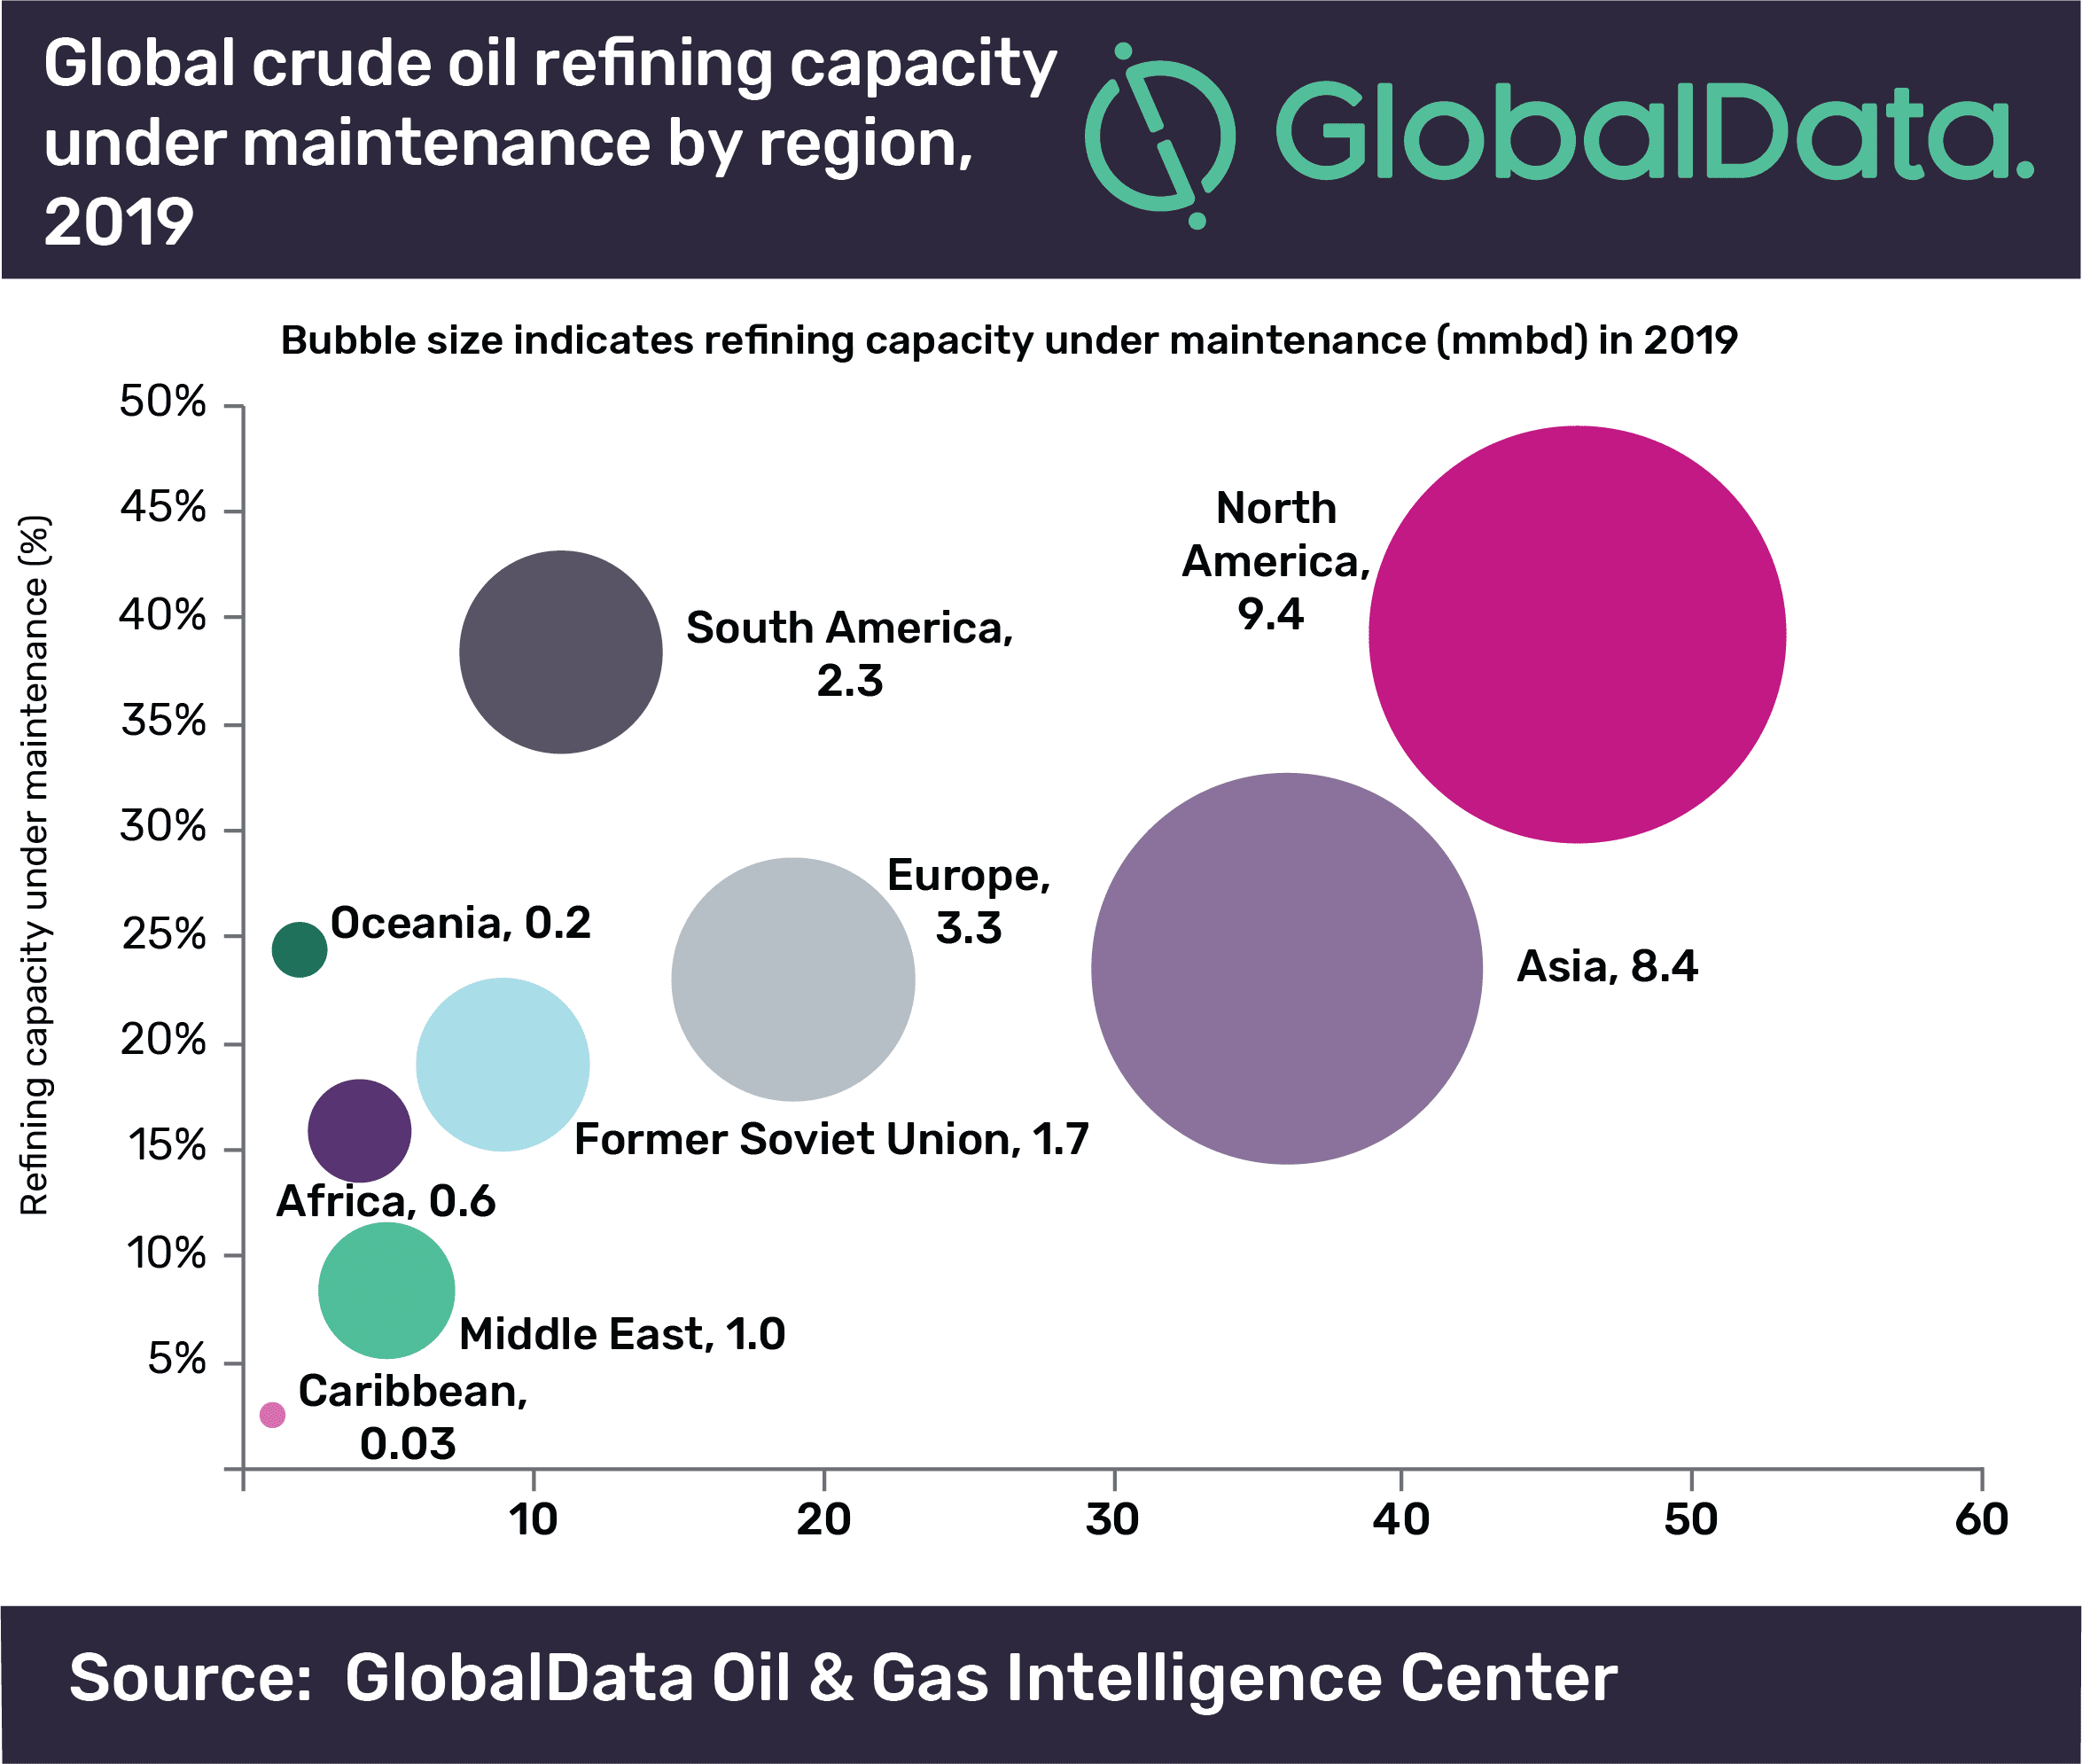 North America incurs highest crude oil refinery maintenance globally in 2019